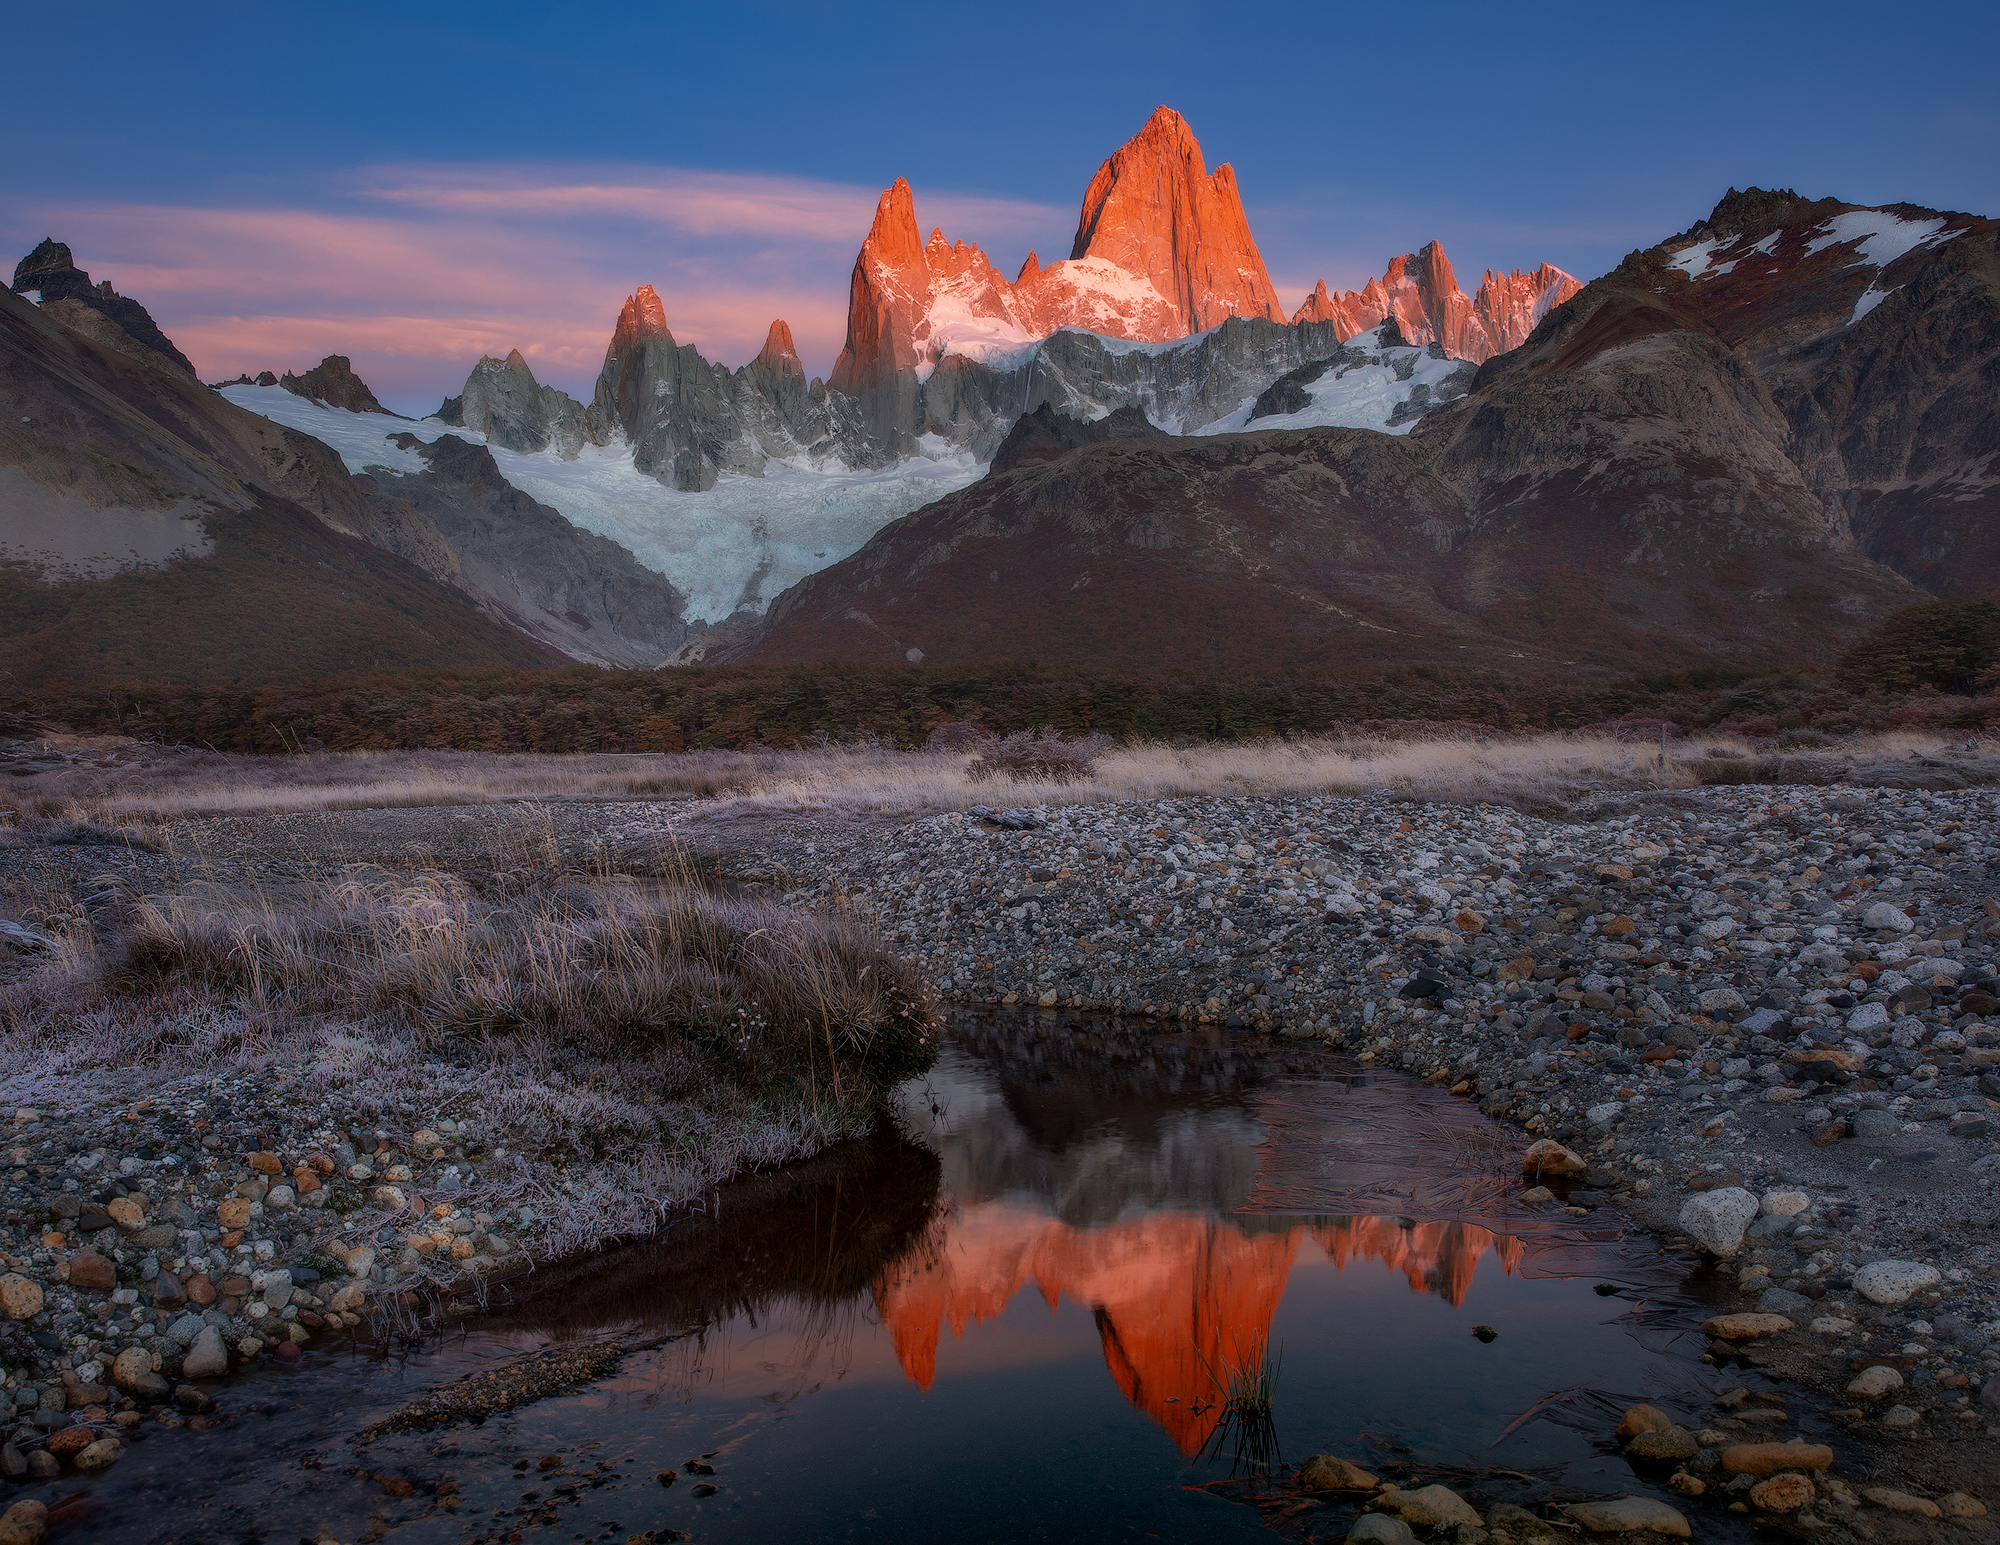 General 2000x1545 mountains Fitz Roy el chalten Patagonia sunset rocks snow clear sky nature reflection